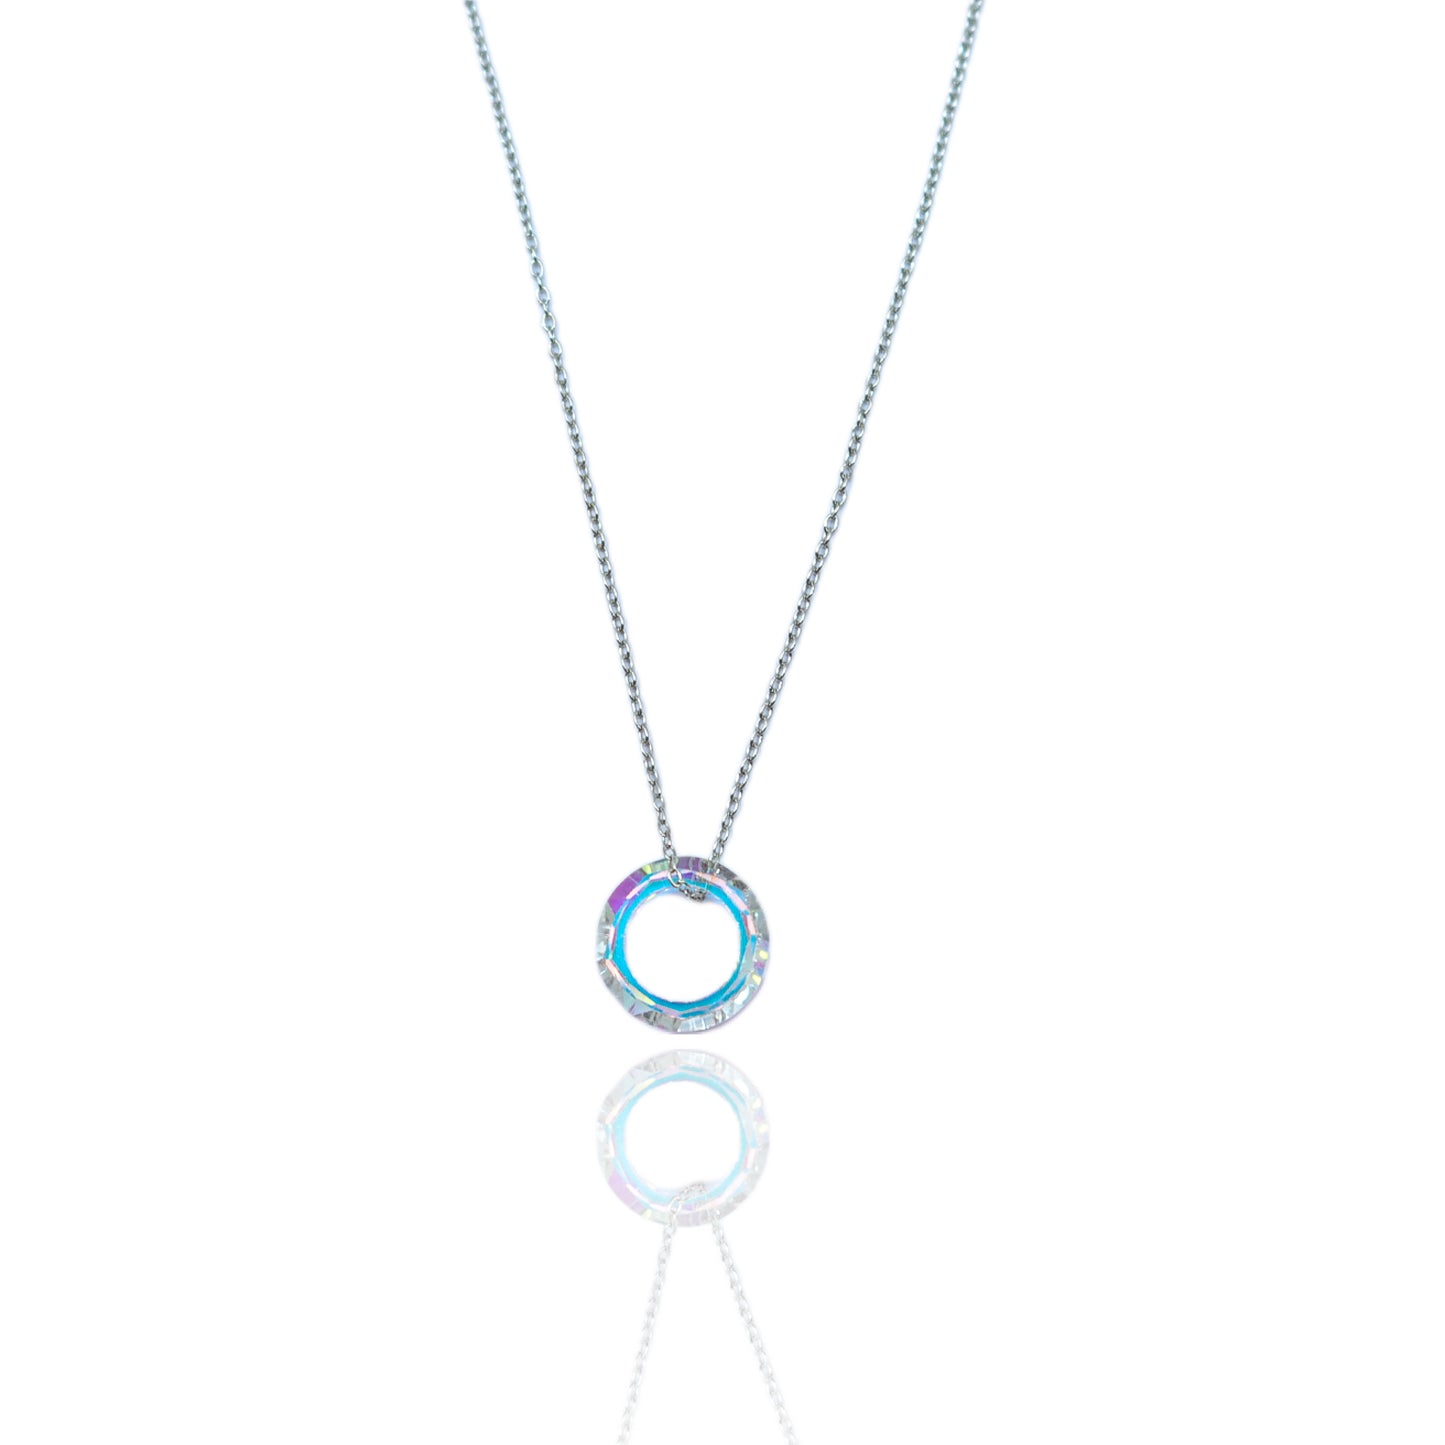 Crystal 92.5 Sterling silver Pendant Chain